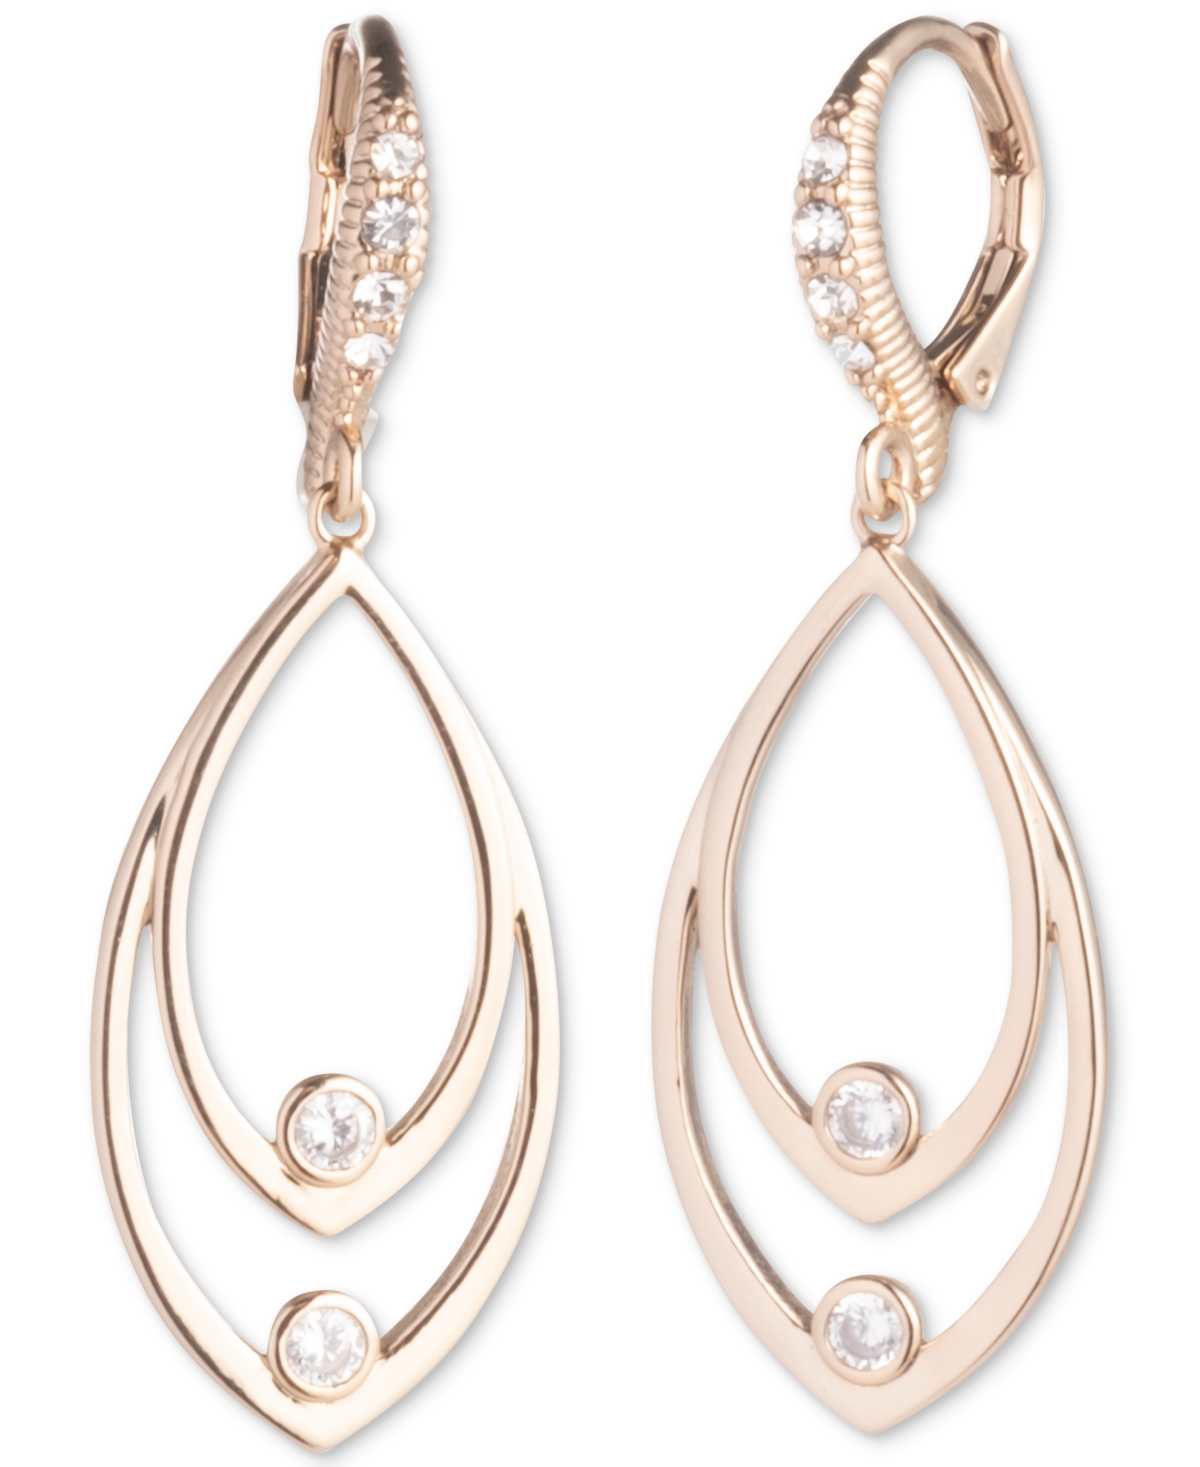 Gold-Tone Crystal Pave Open Drop Earrings - White